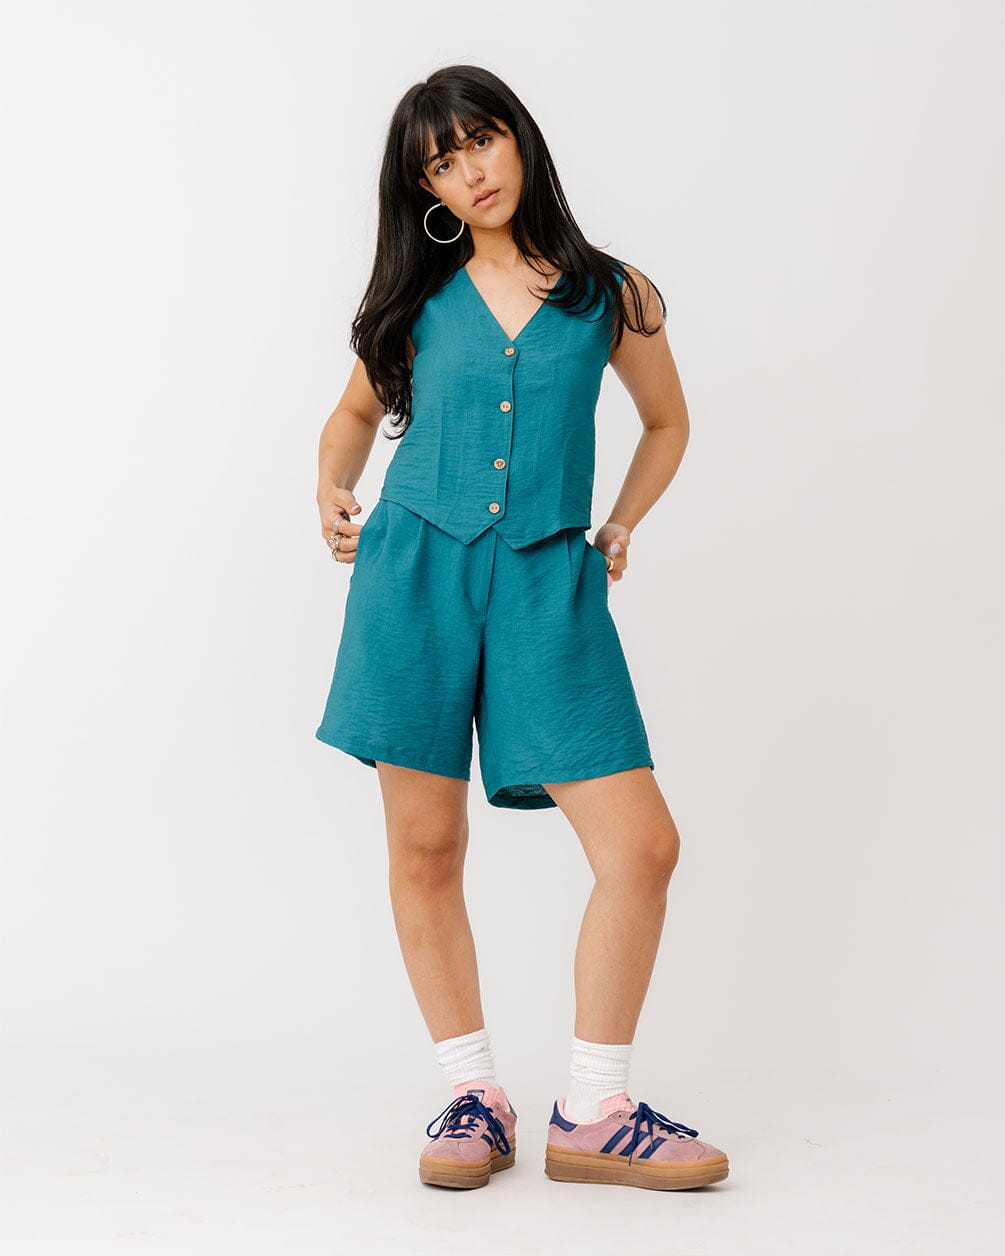 Teal Linen Shorts Linen Shorts IN YOUR SHOE M 